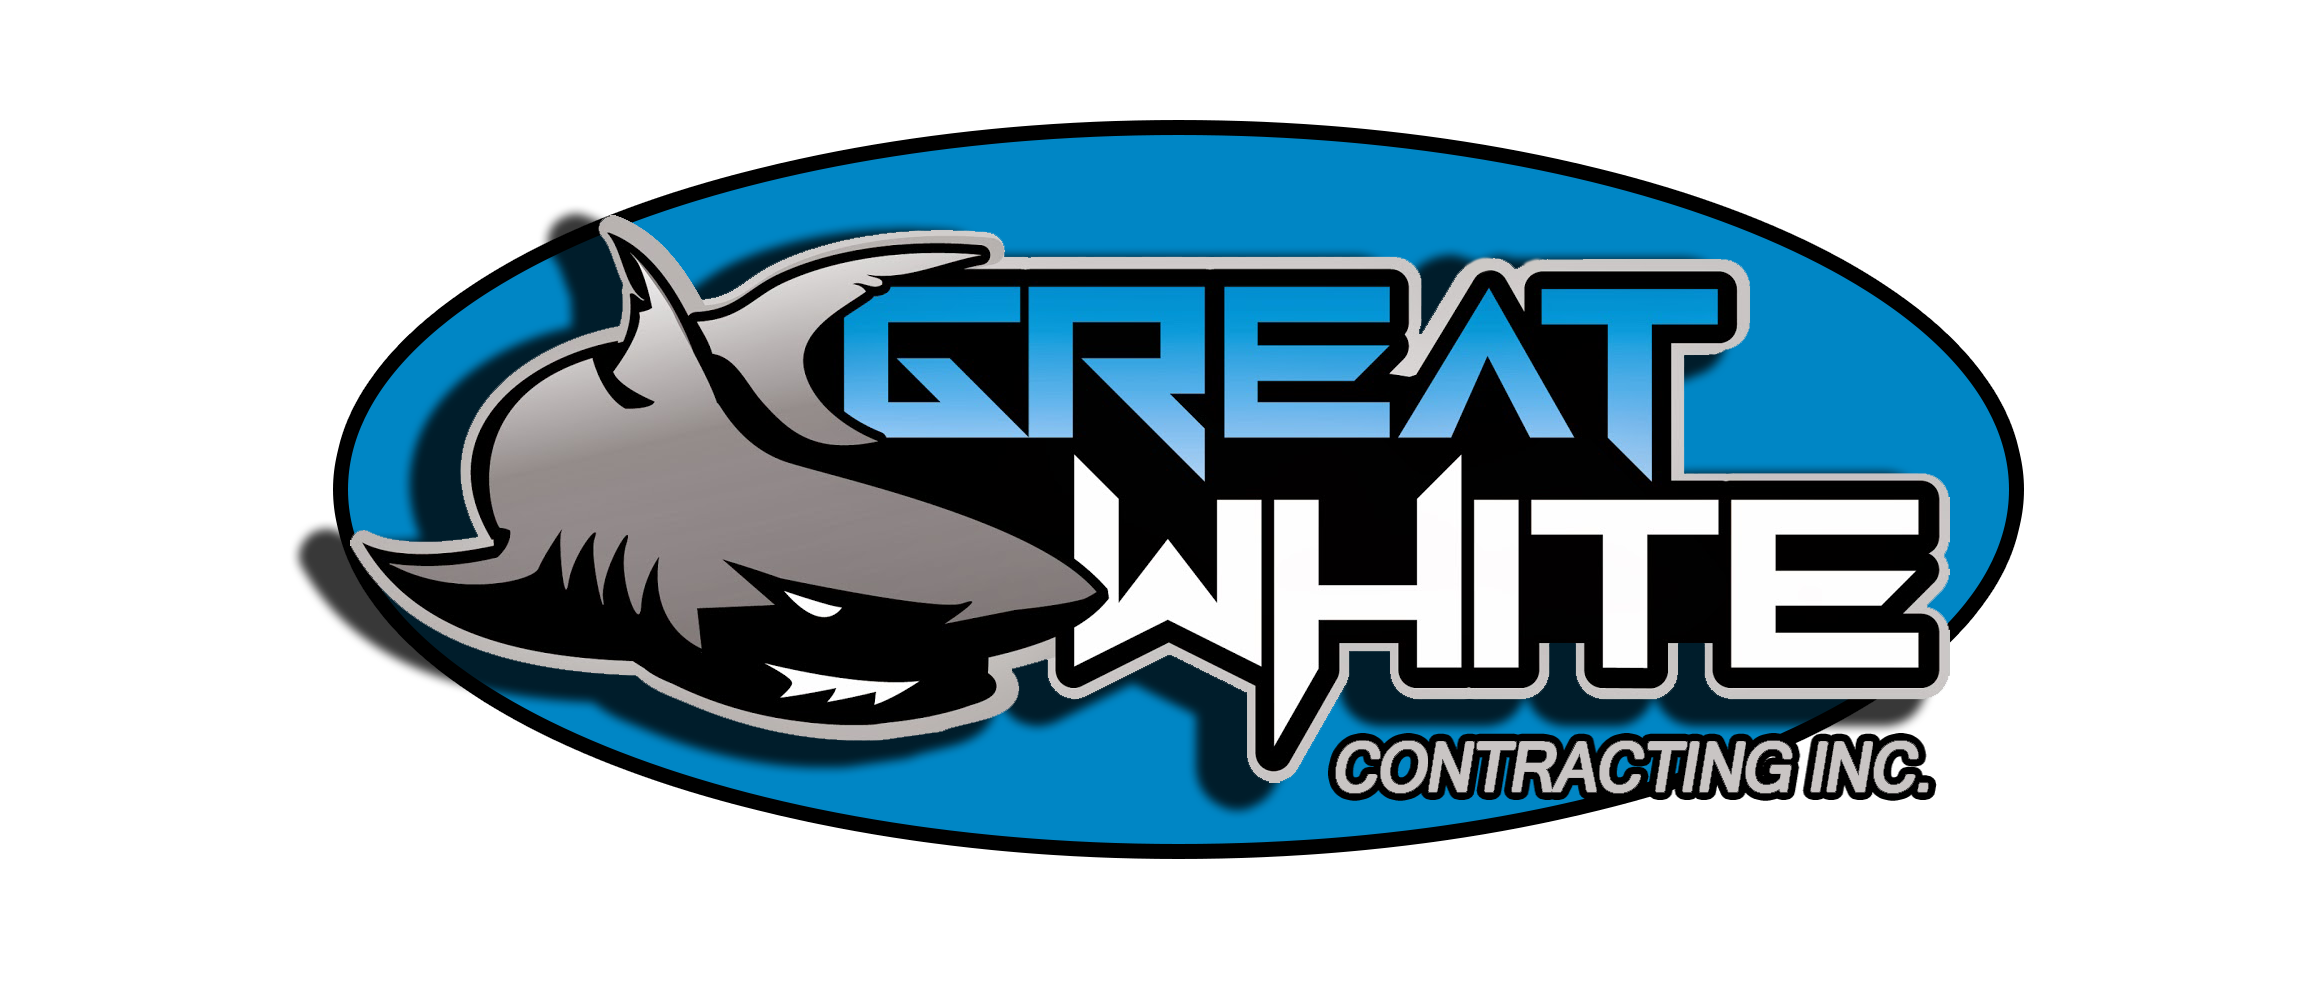 Great White Contracting, Inc. Logo